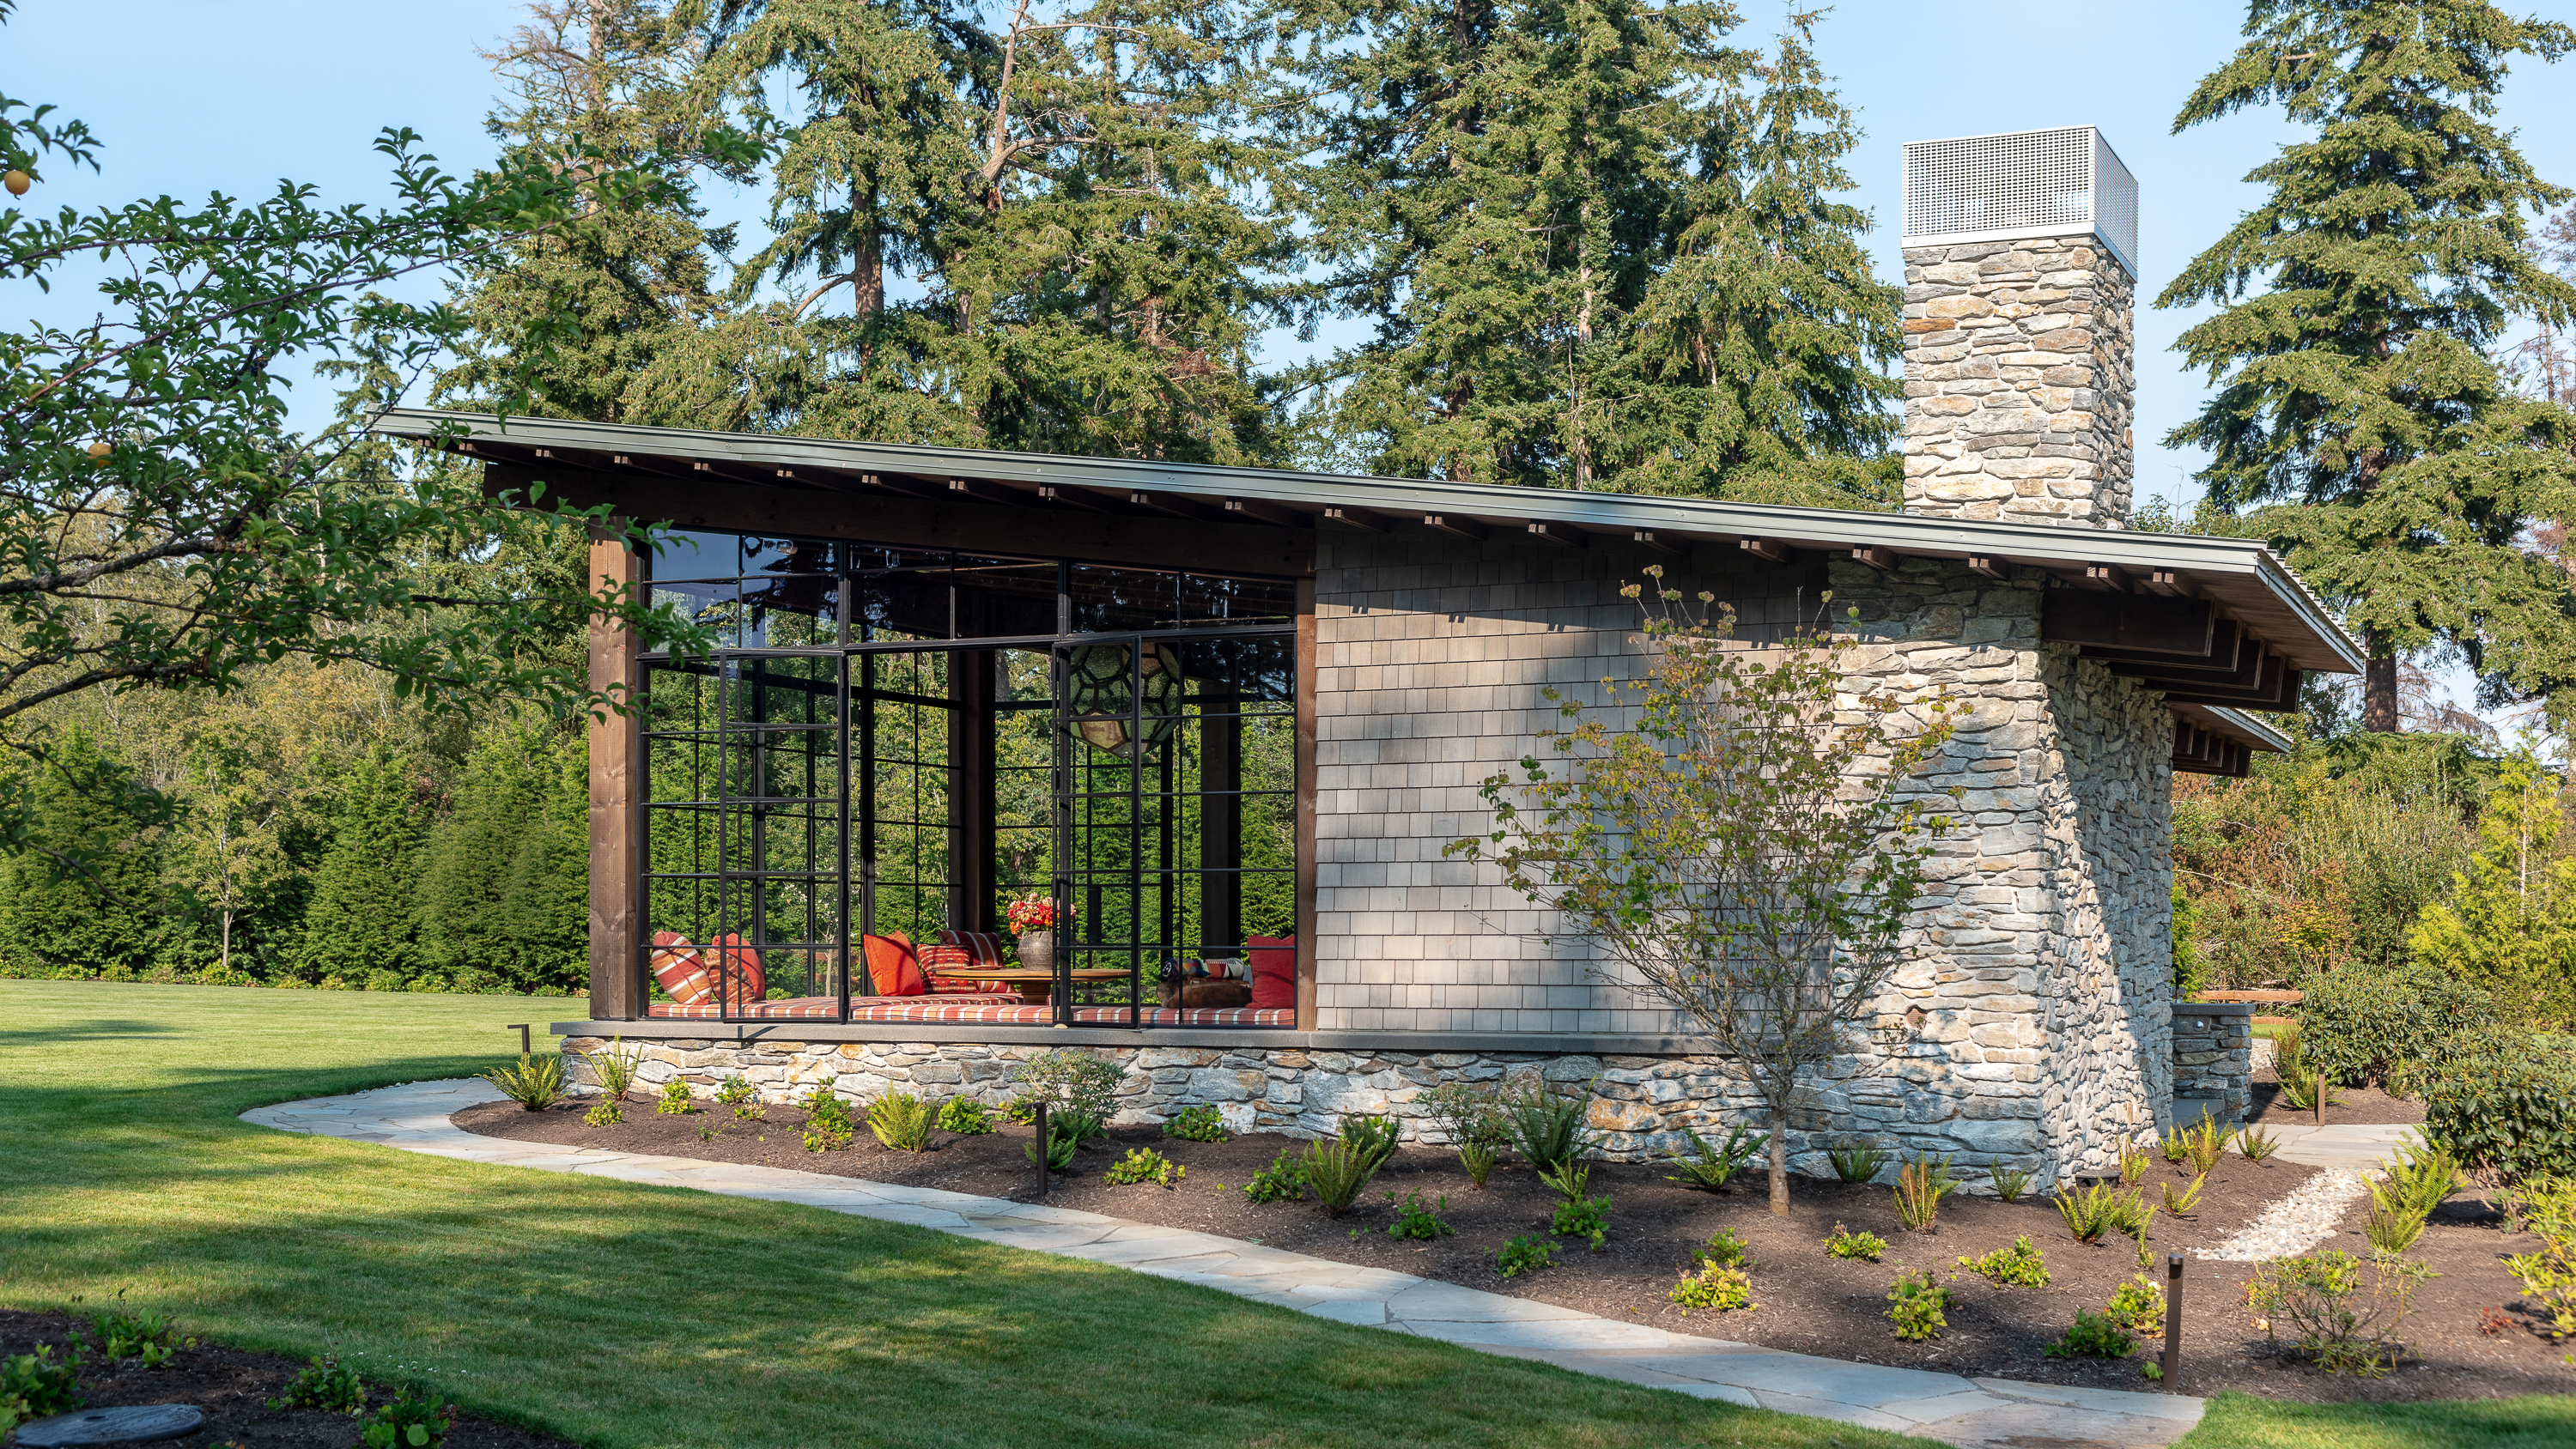 Our fieldhouse project is a great example of Pacific Northwest Architecture.